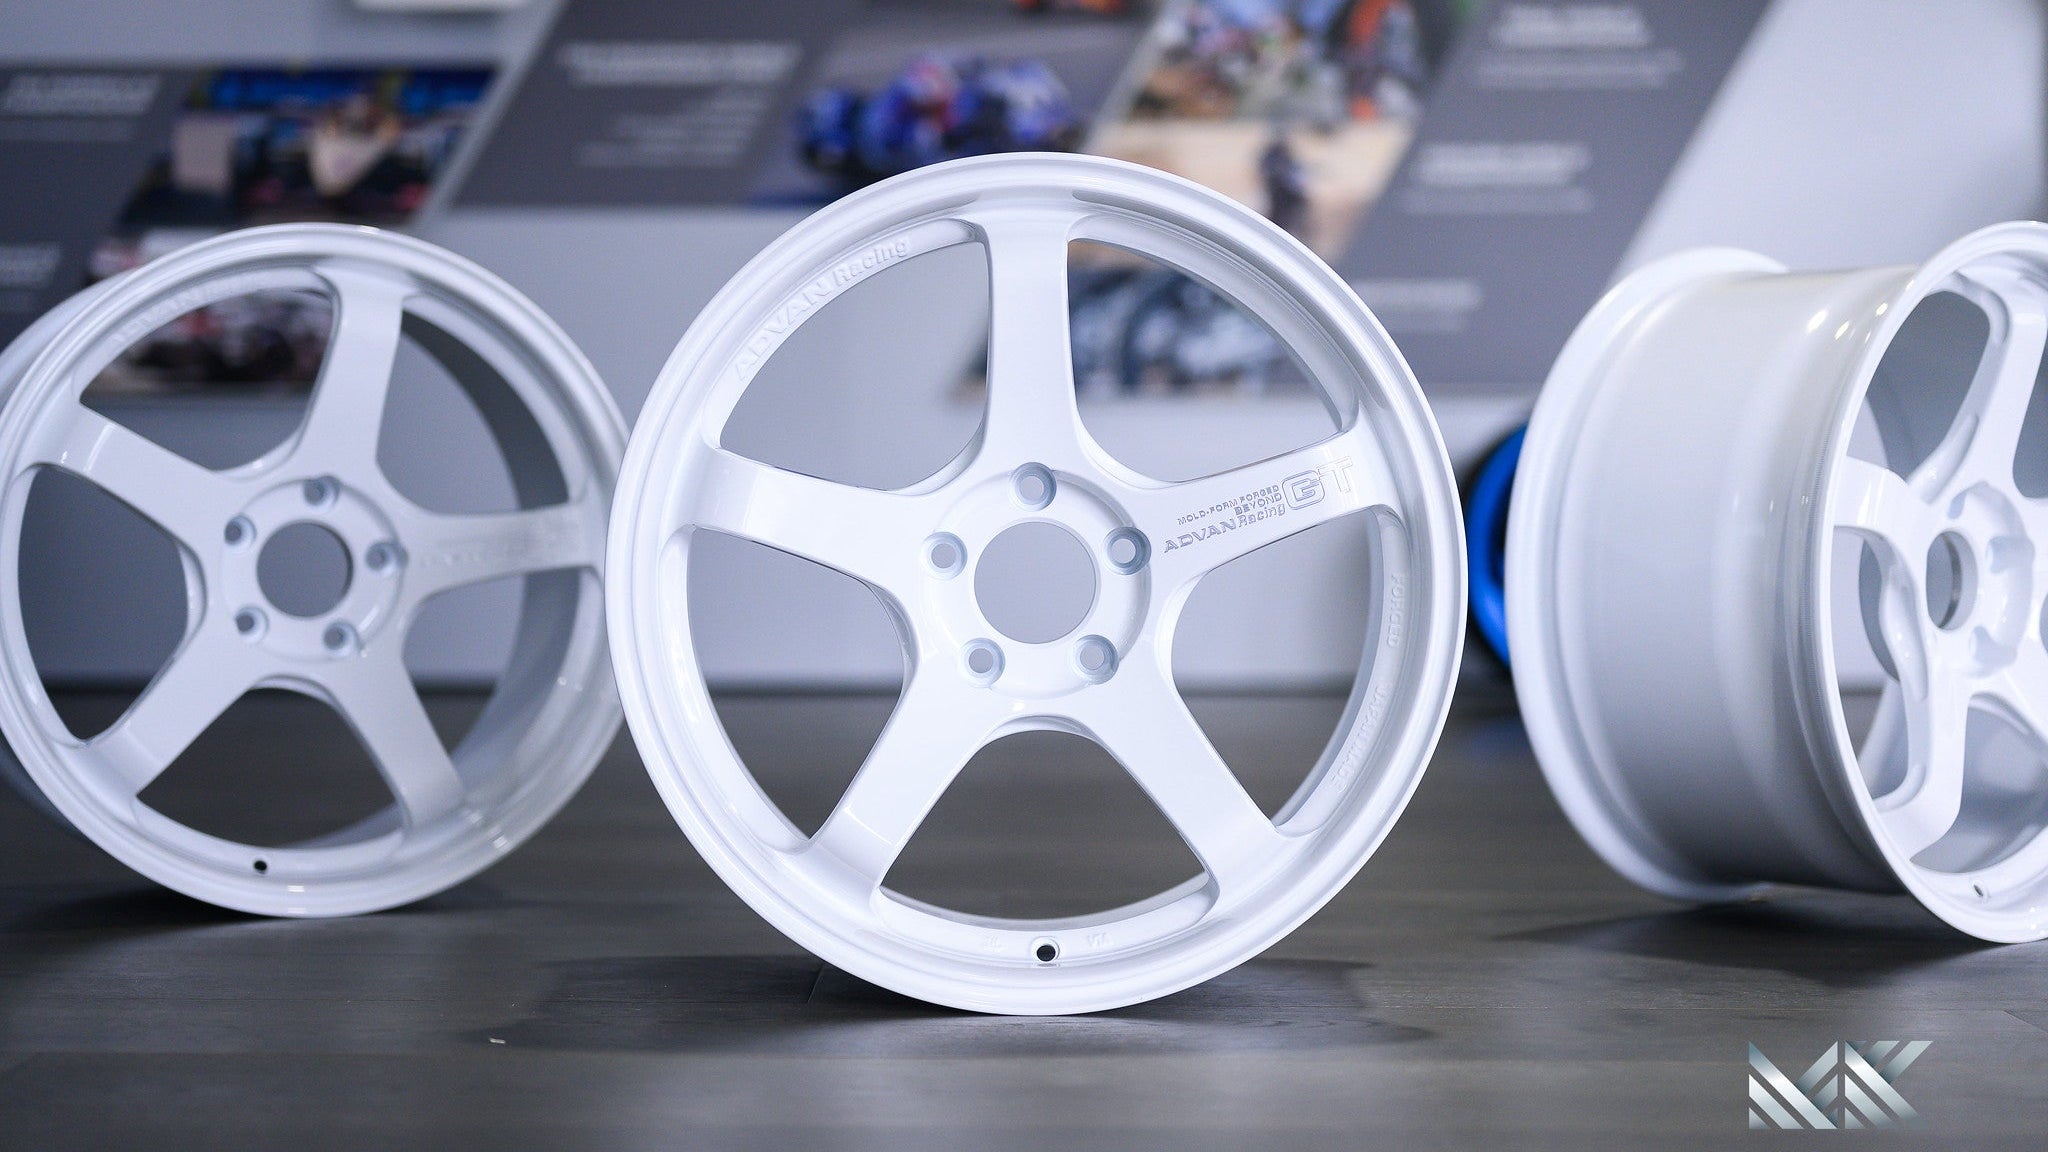 Advan GT Beyond A90 Supra - Premium Wheels from Advan Racing - From just $4790.00! Shop now at MK MOTORSPORTS